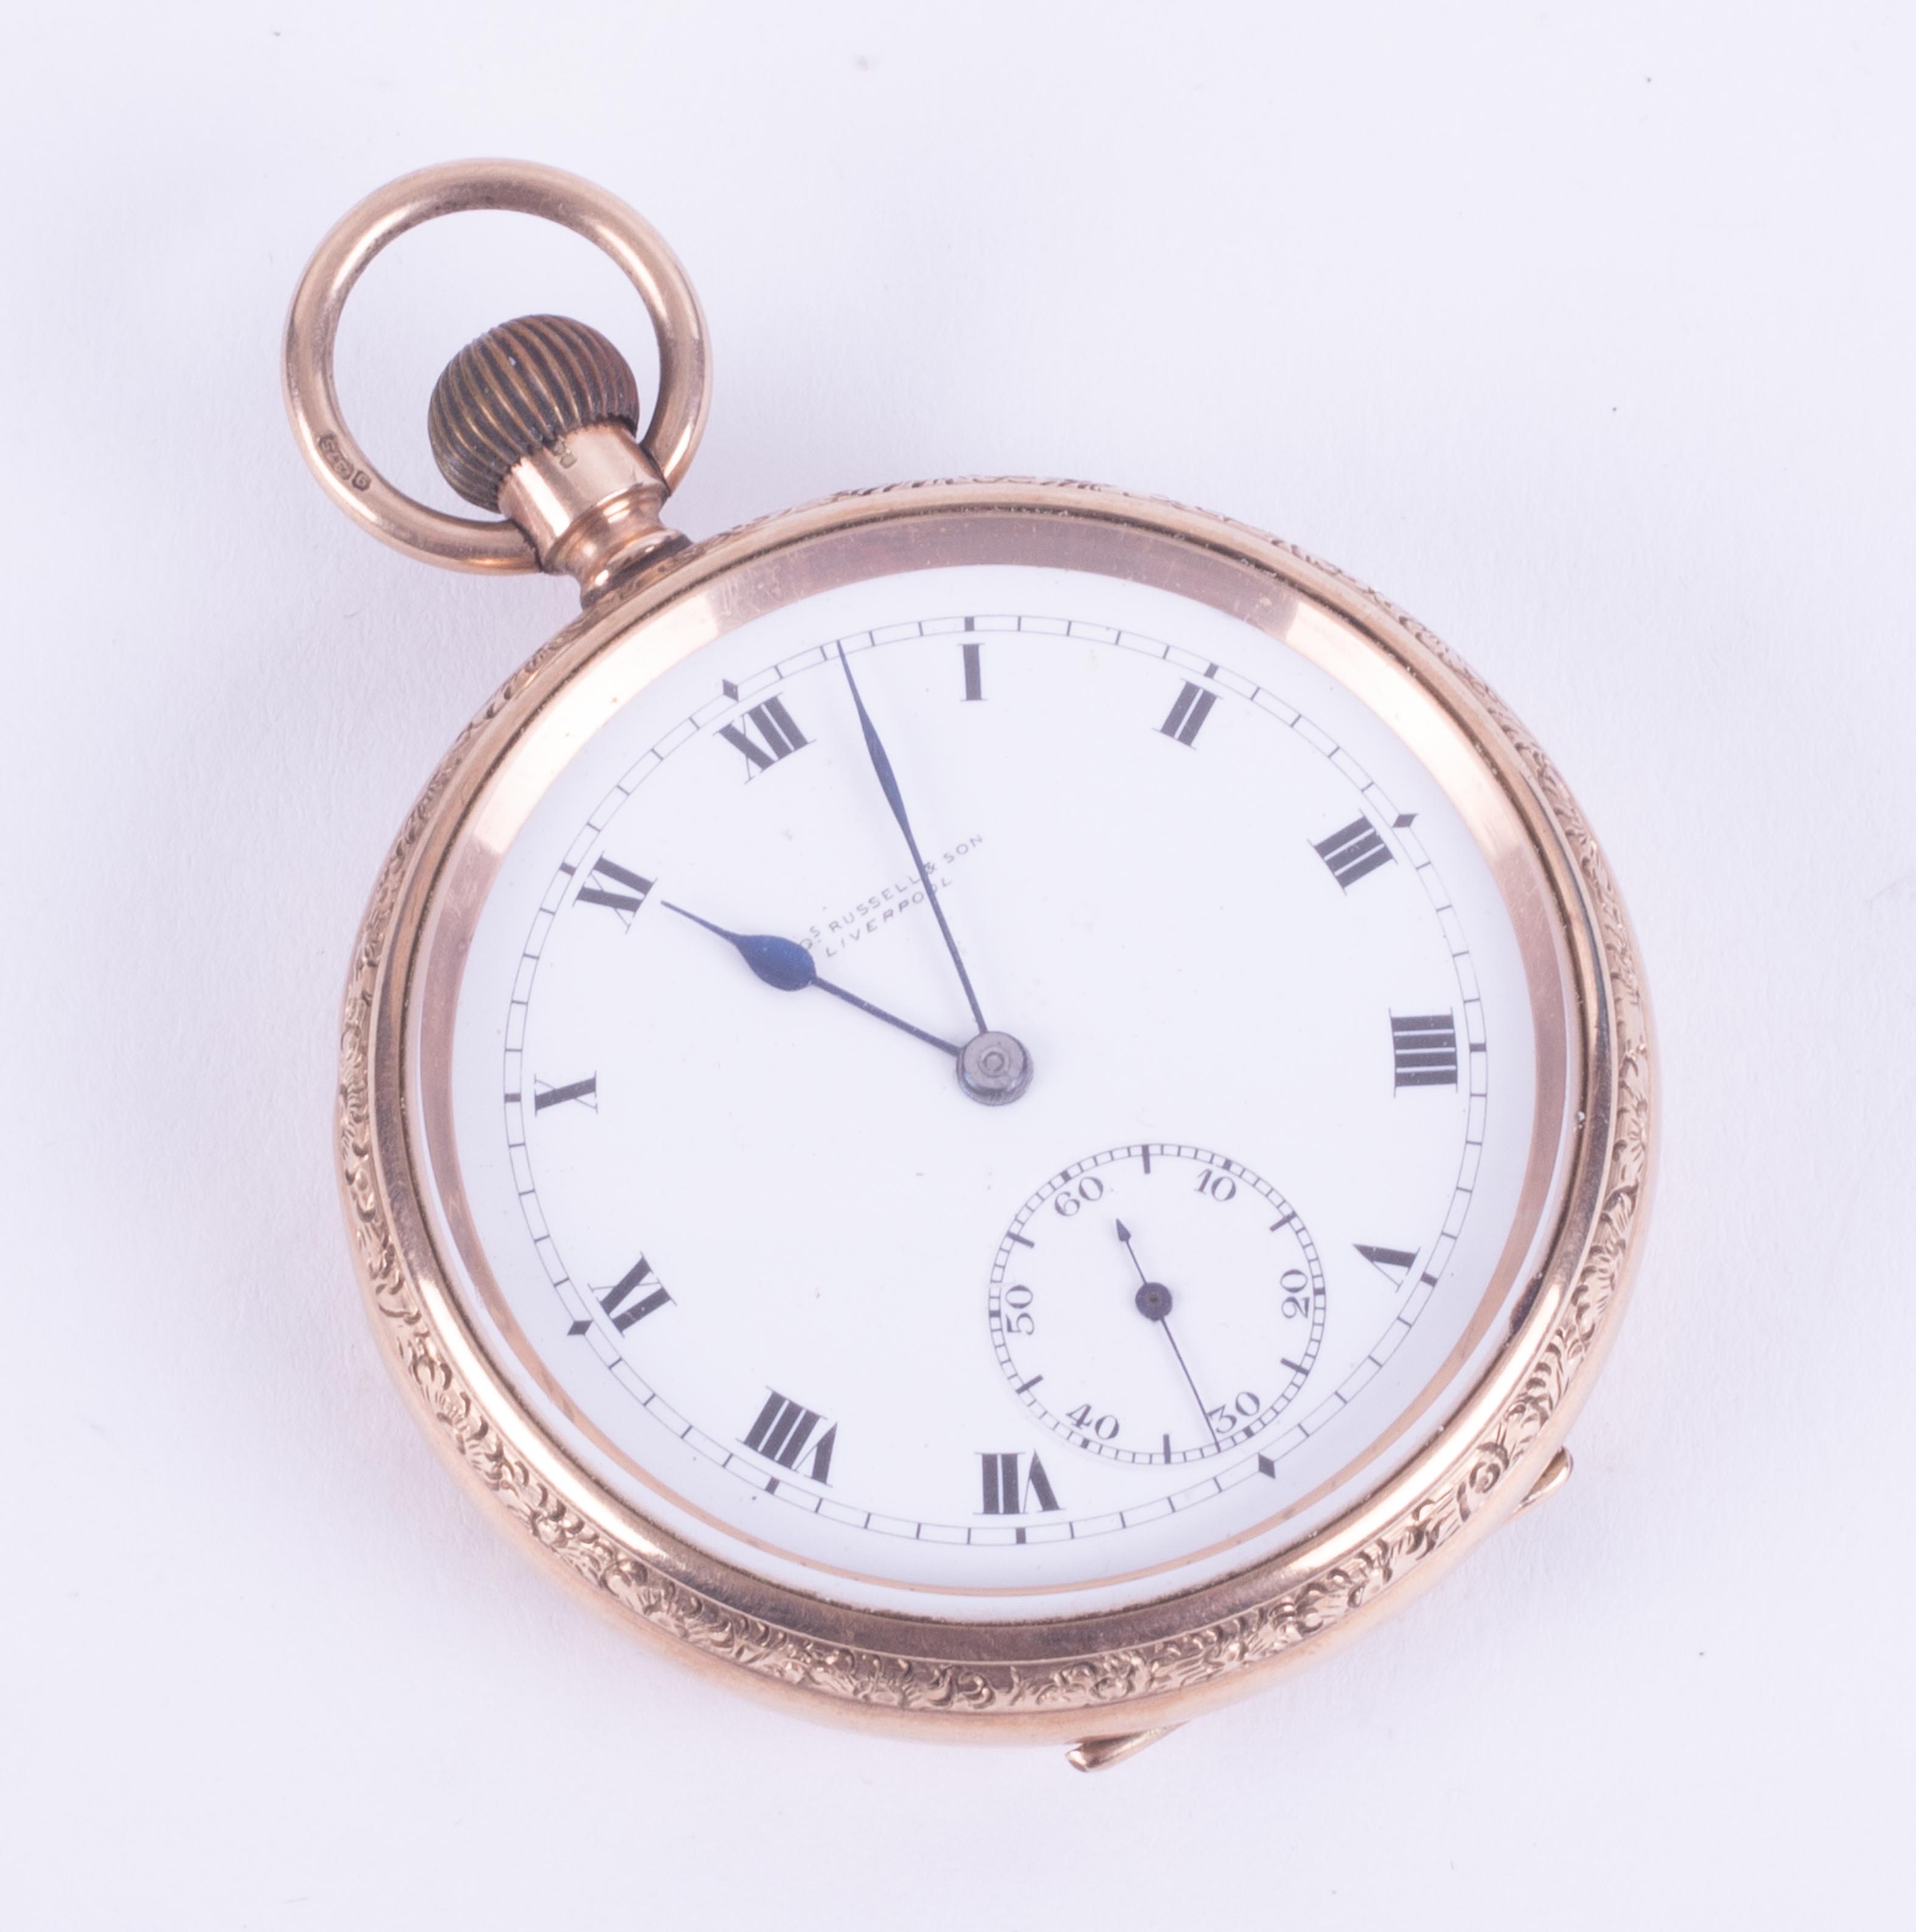 An open face pocket watch, 9ct yellow gold case, Chester hall mark, date letter H, circa 1908/10,